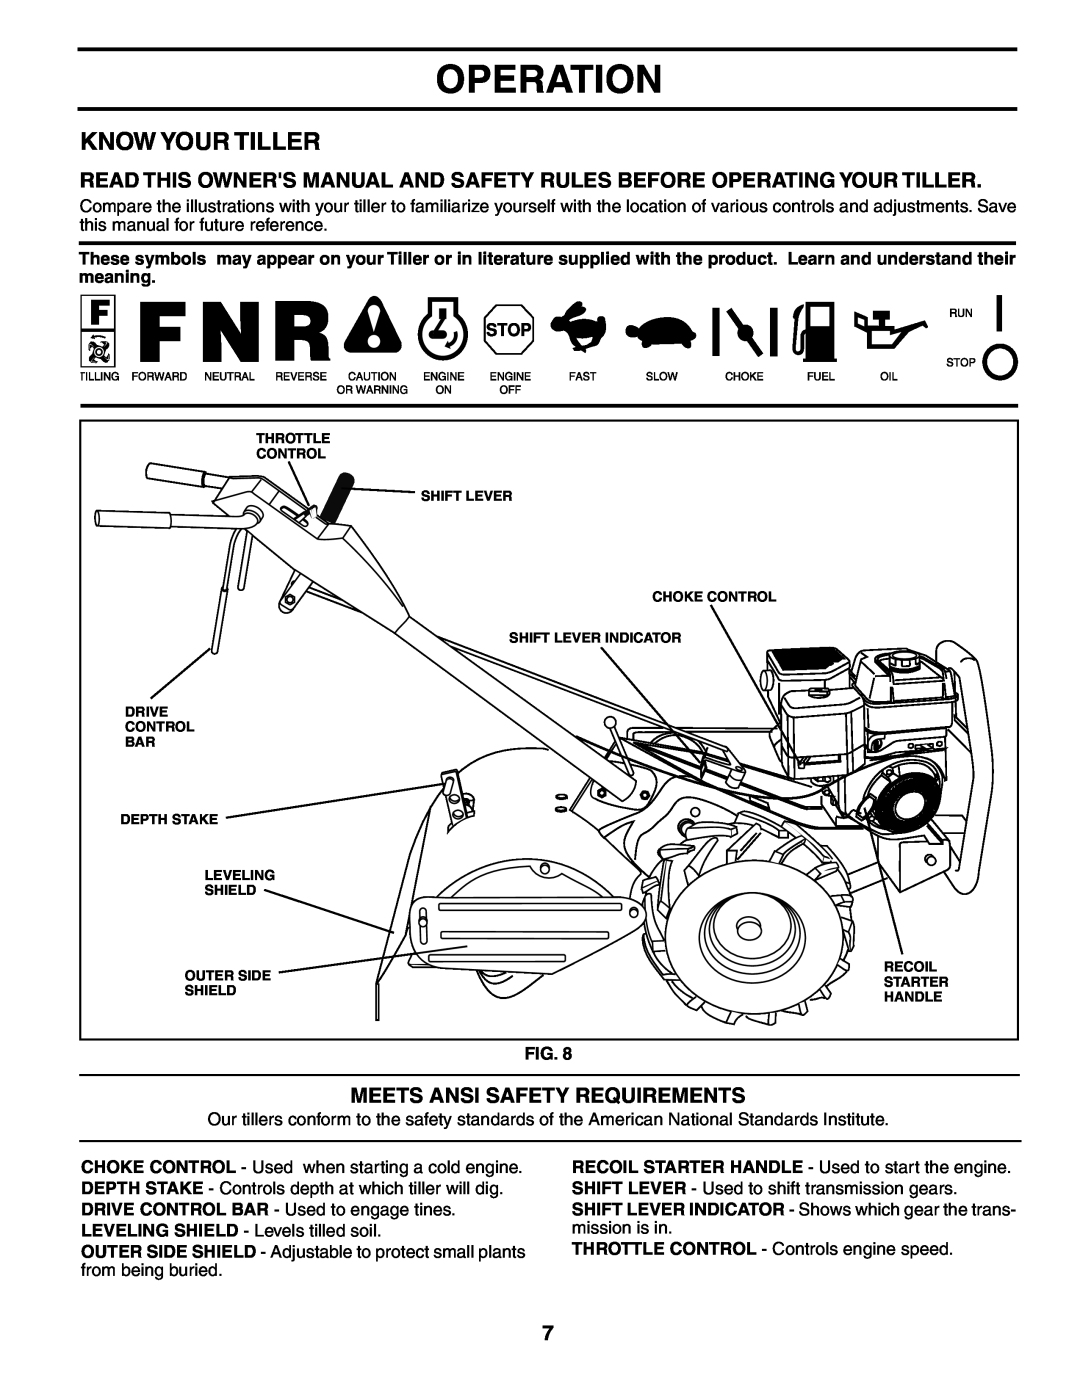 Poulan PRRT65D owner manual Operation, Know Your Tiller, Meets Ansi Safety Requirements, Fig 